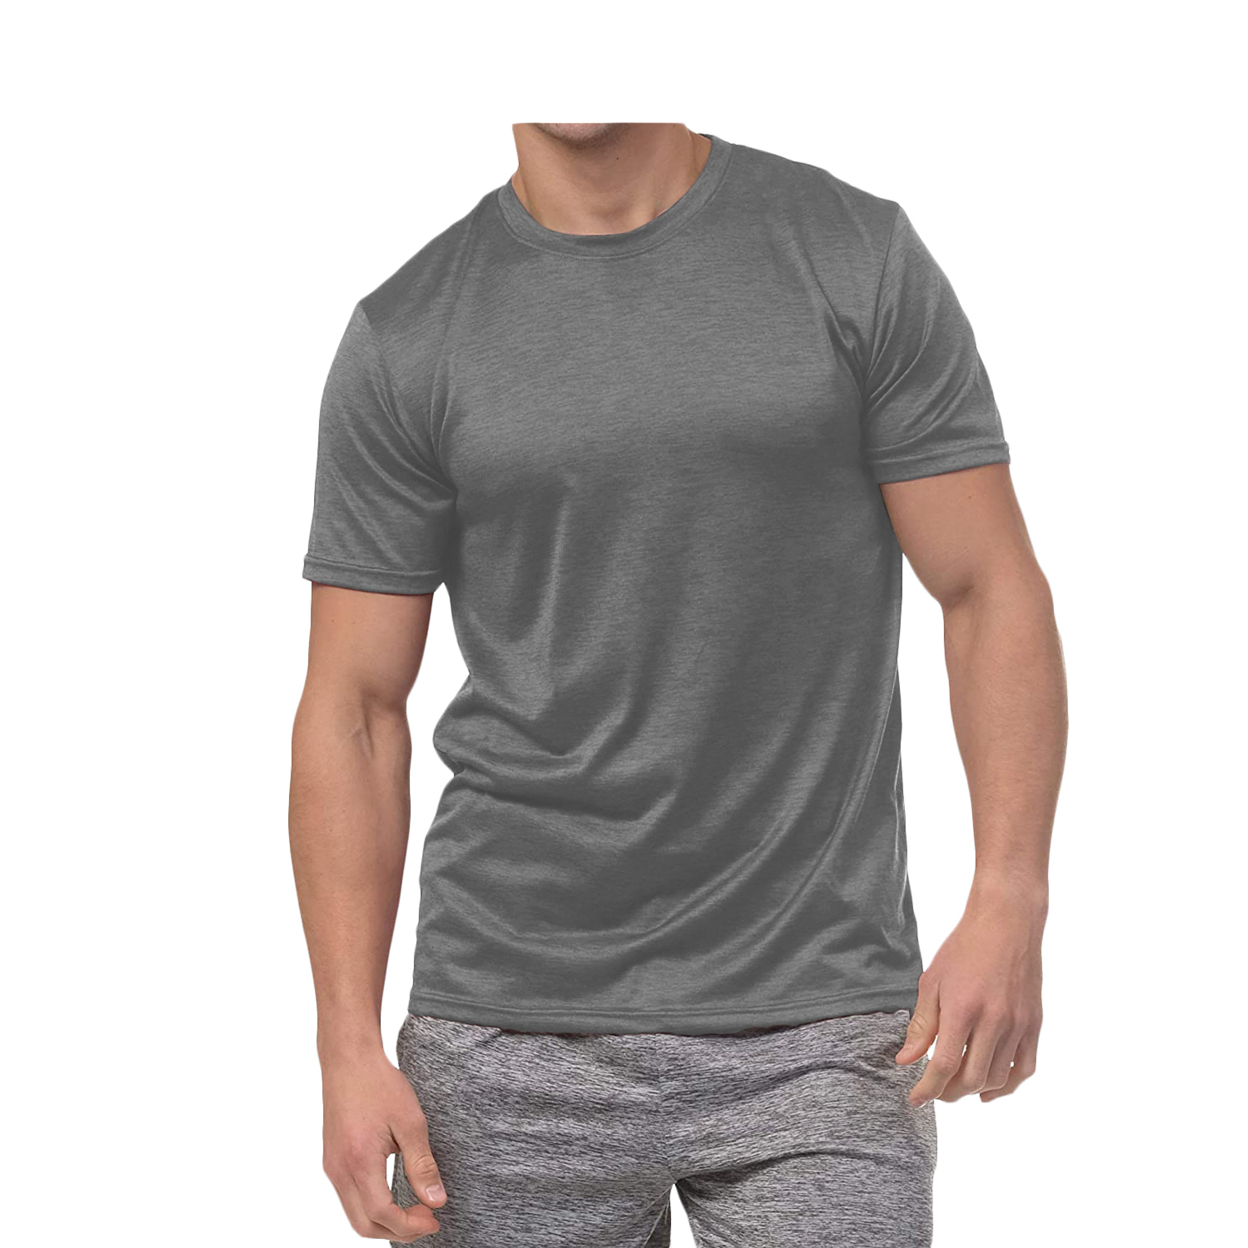 5-Pack: Men's Active Moisture Wicking Dry Fit Crew Neck Shirts - Large